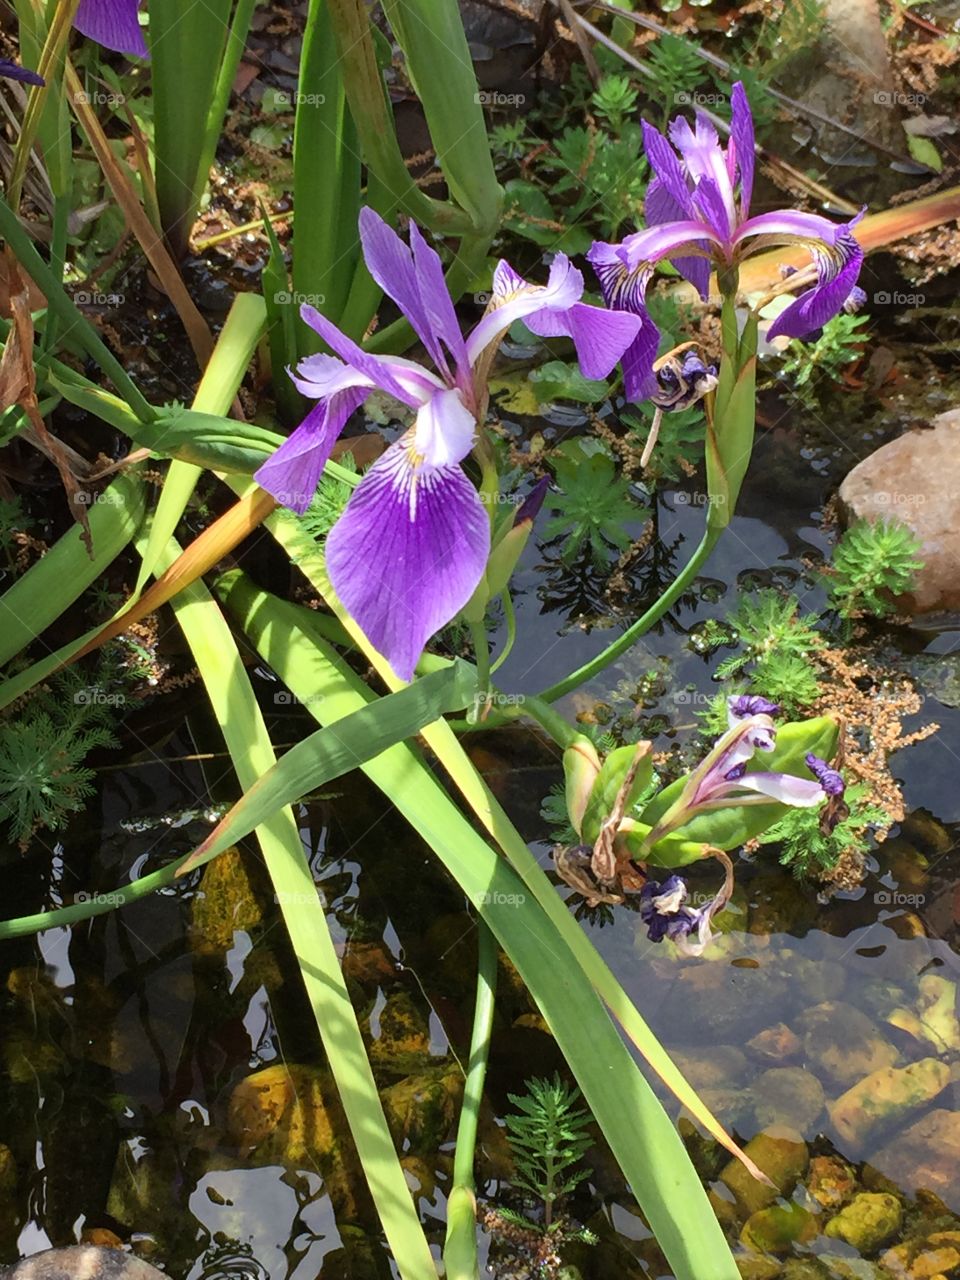 Lilies blooming in a stream. 